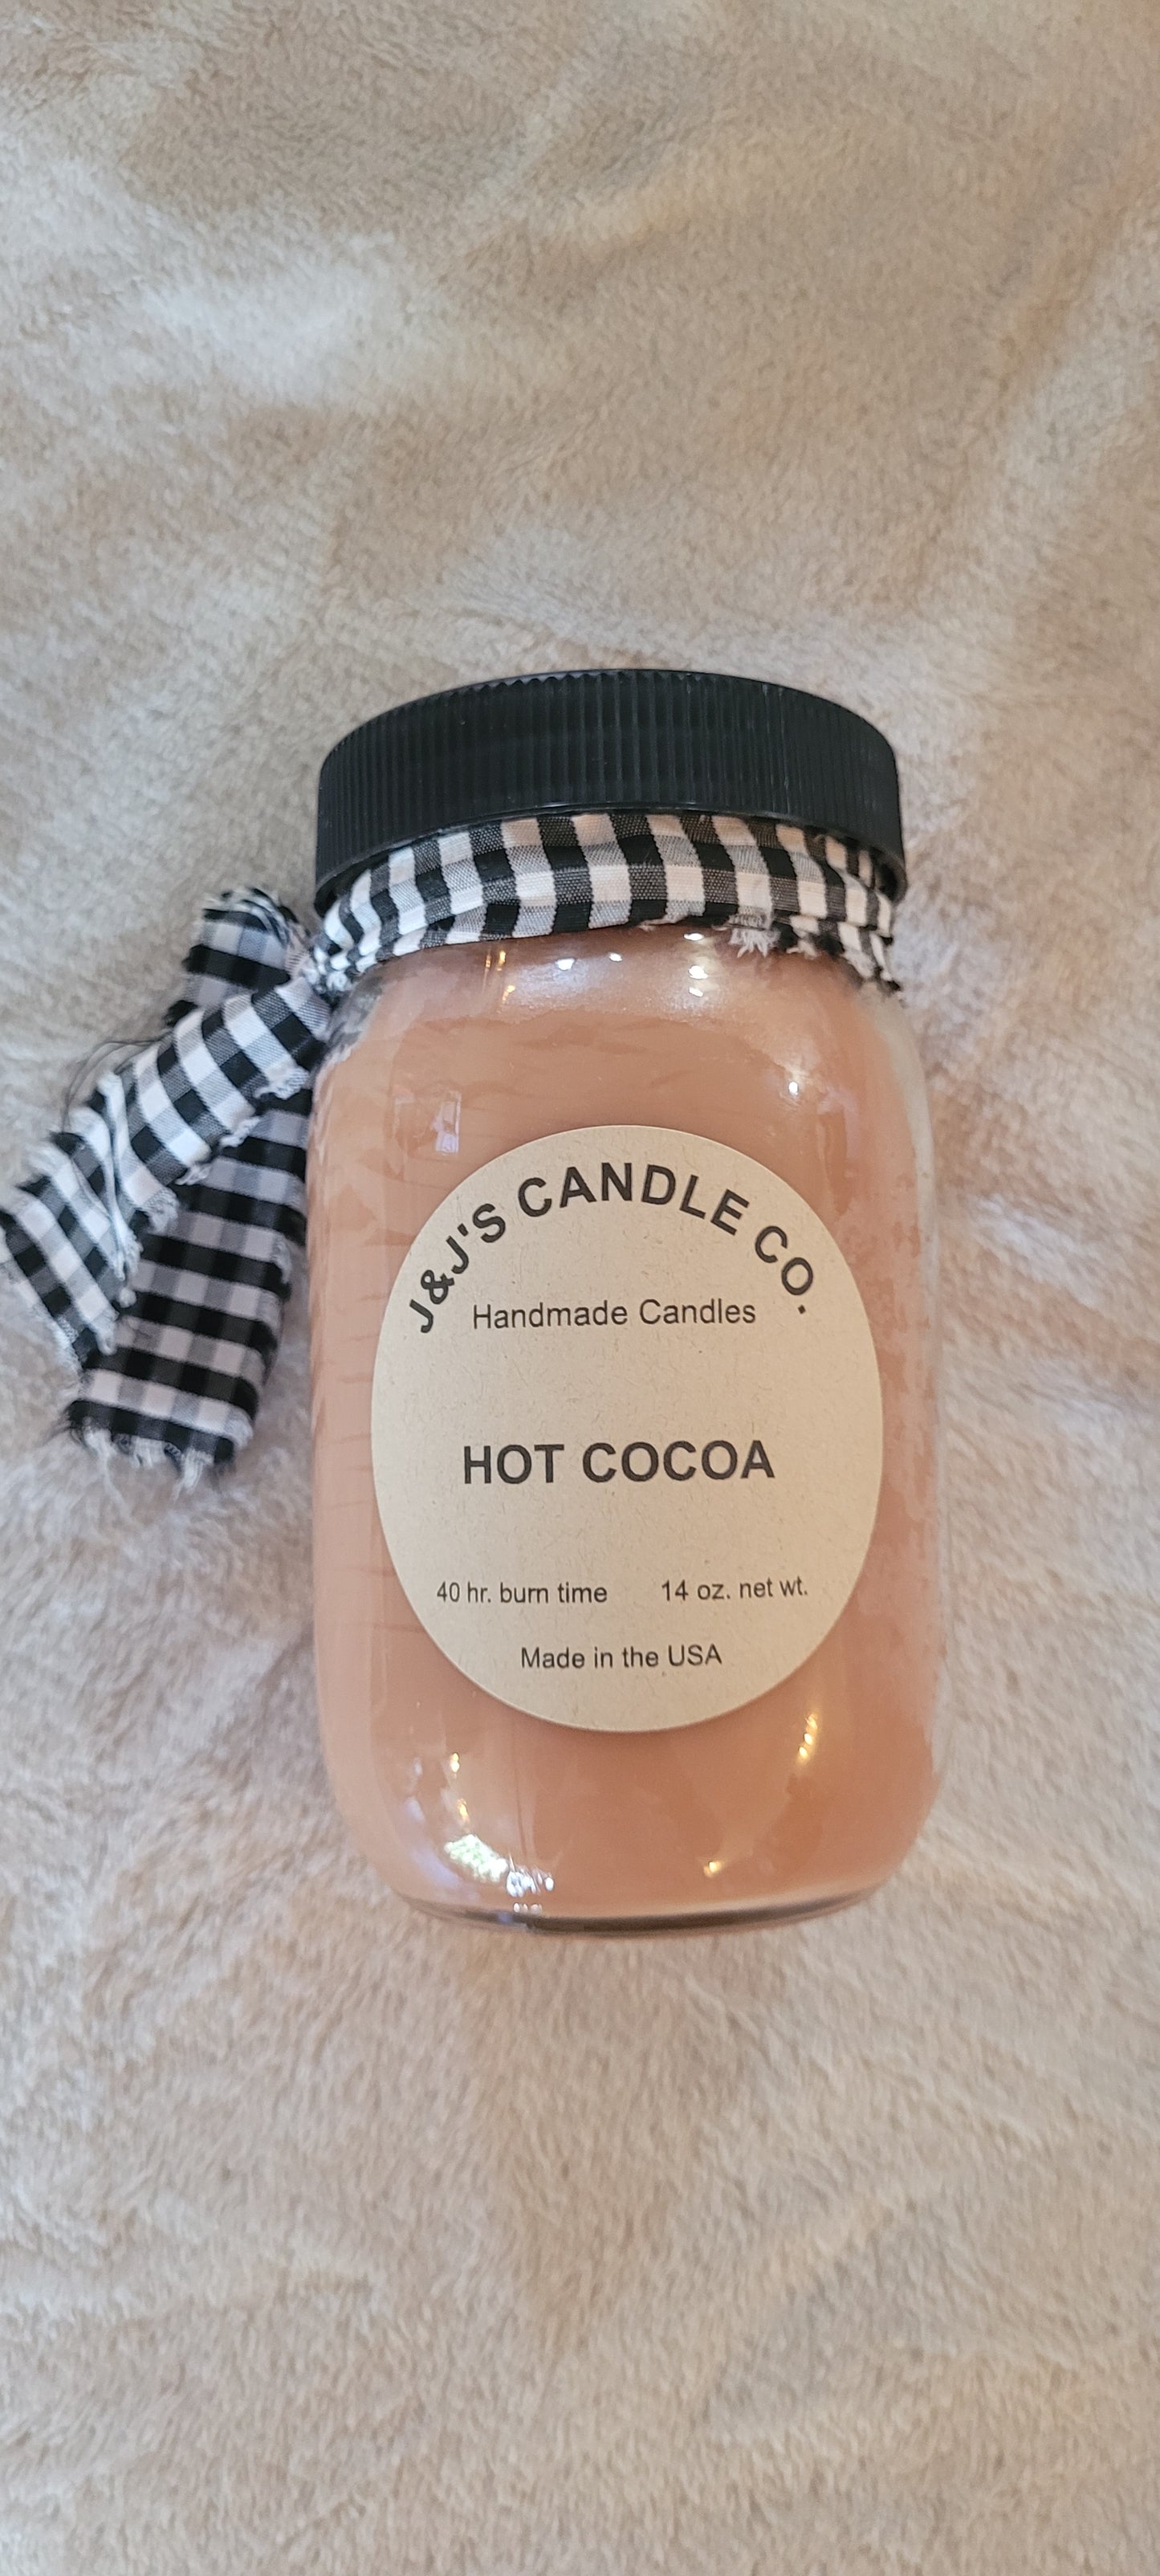 J&J's Candle Co. Hot Cocoa